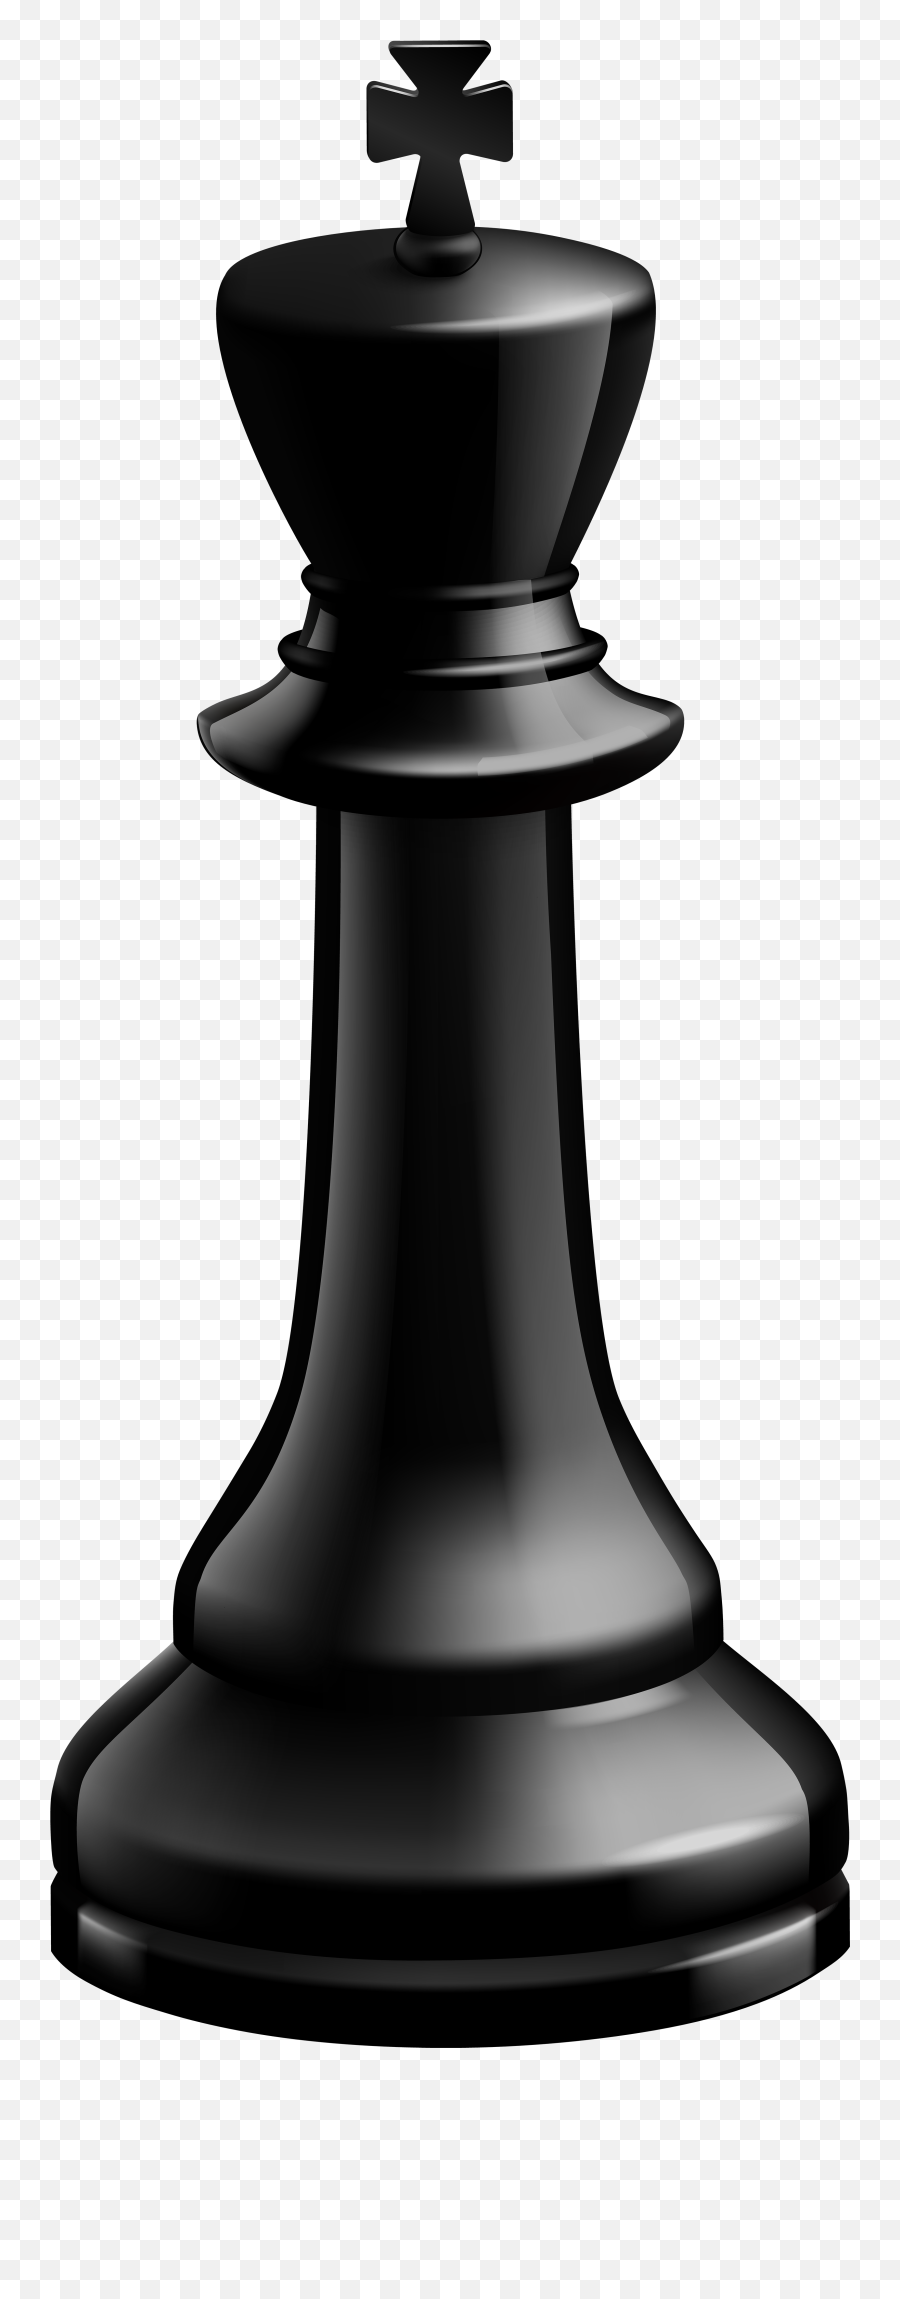 Png Clip Art - King Chess Piece Png,Chess Pieces Png